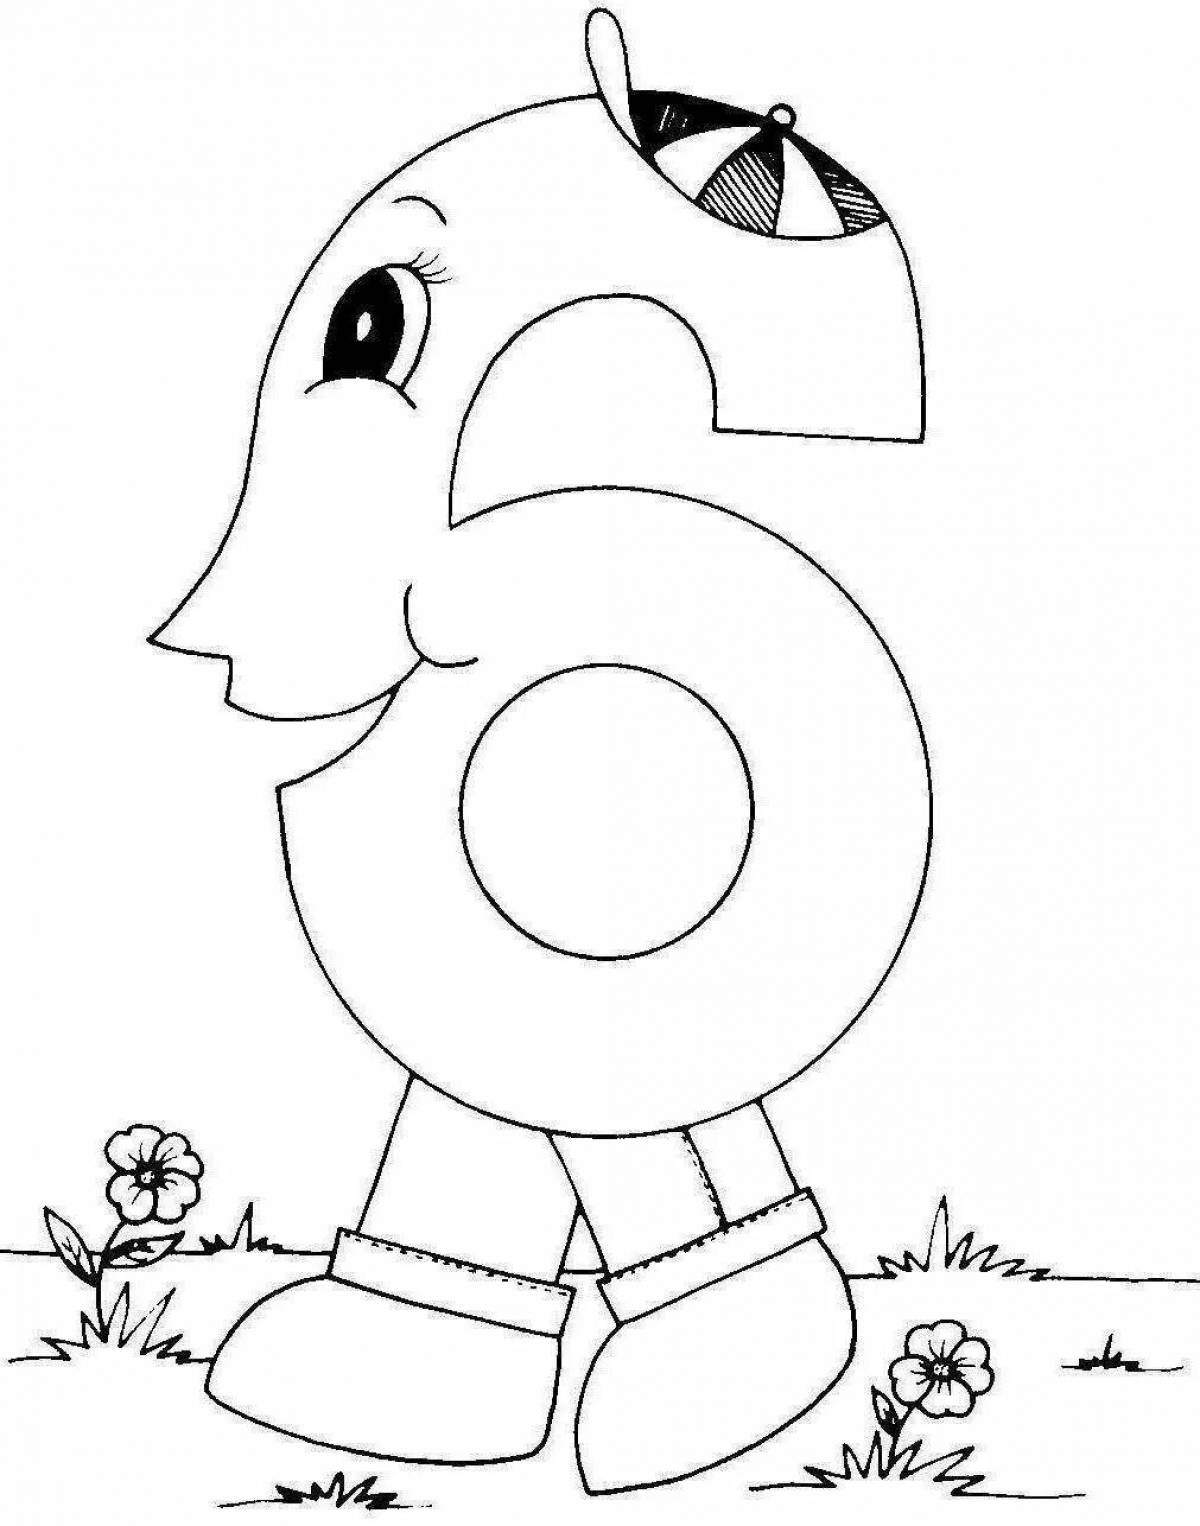 Intriguing coloring pages with living figures